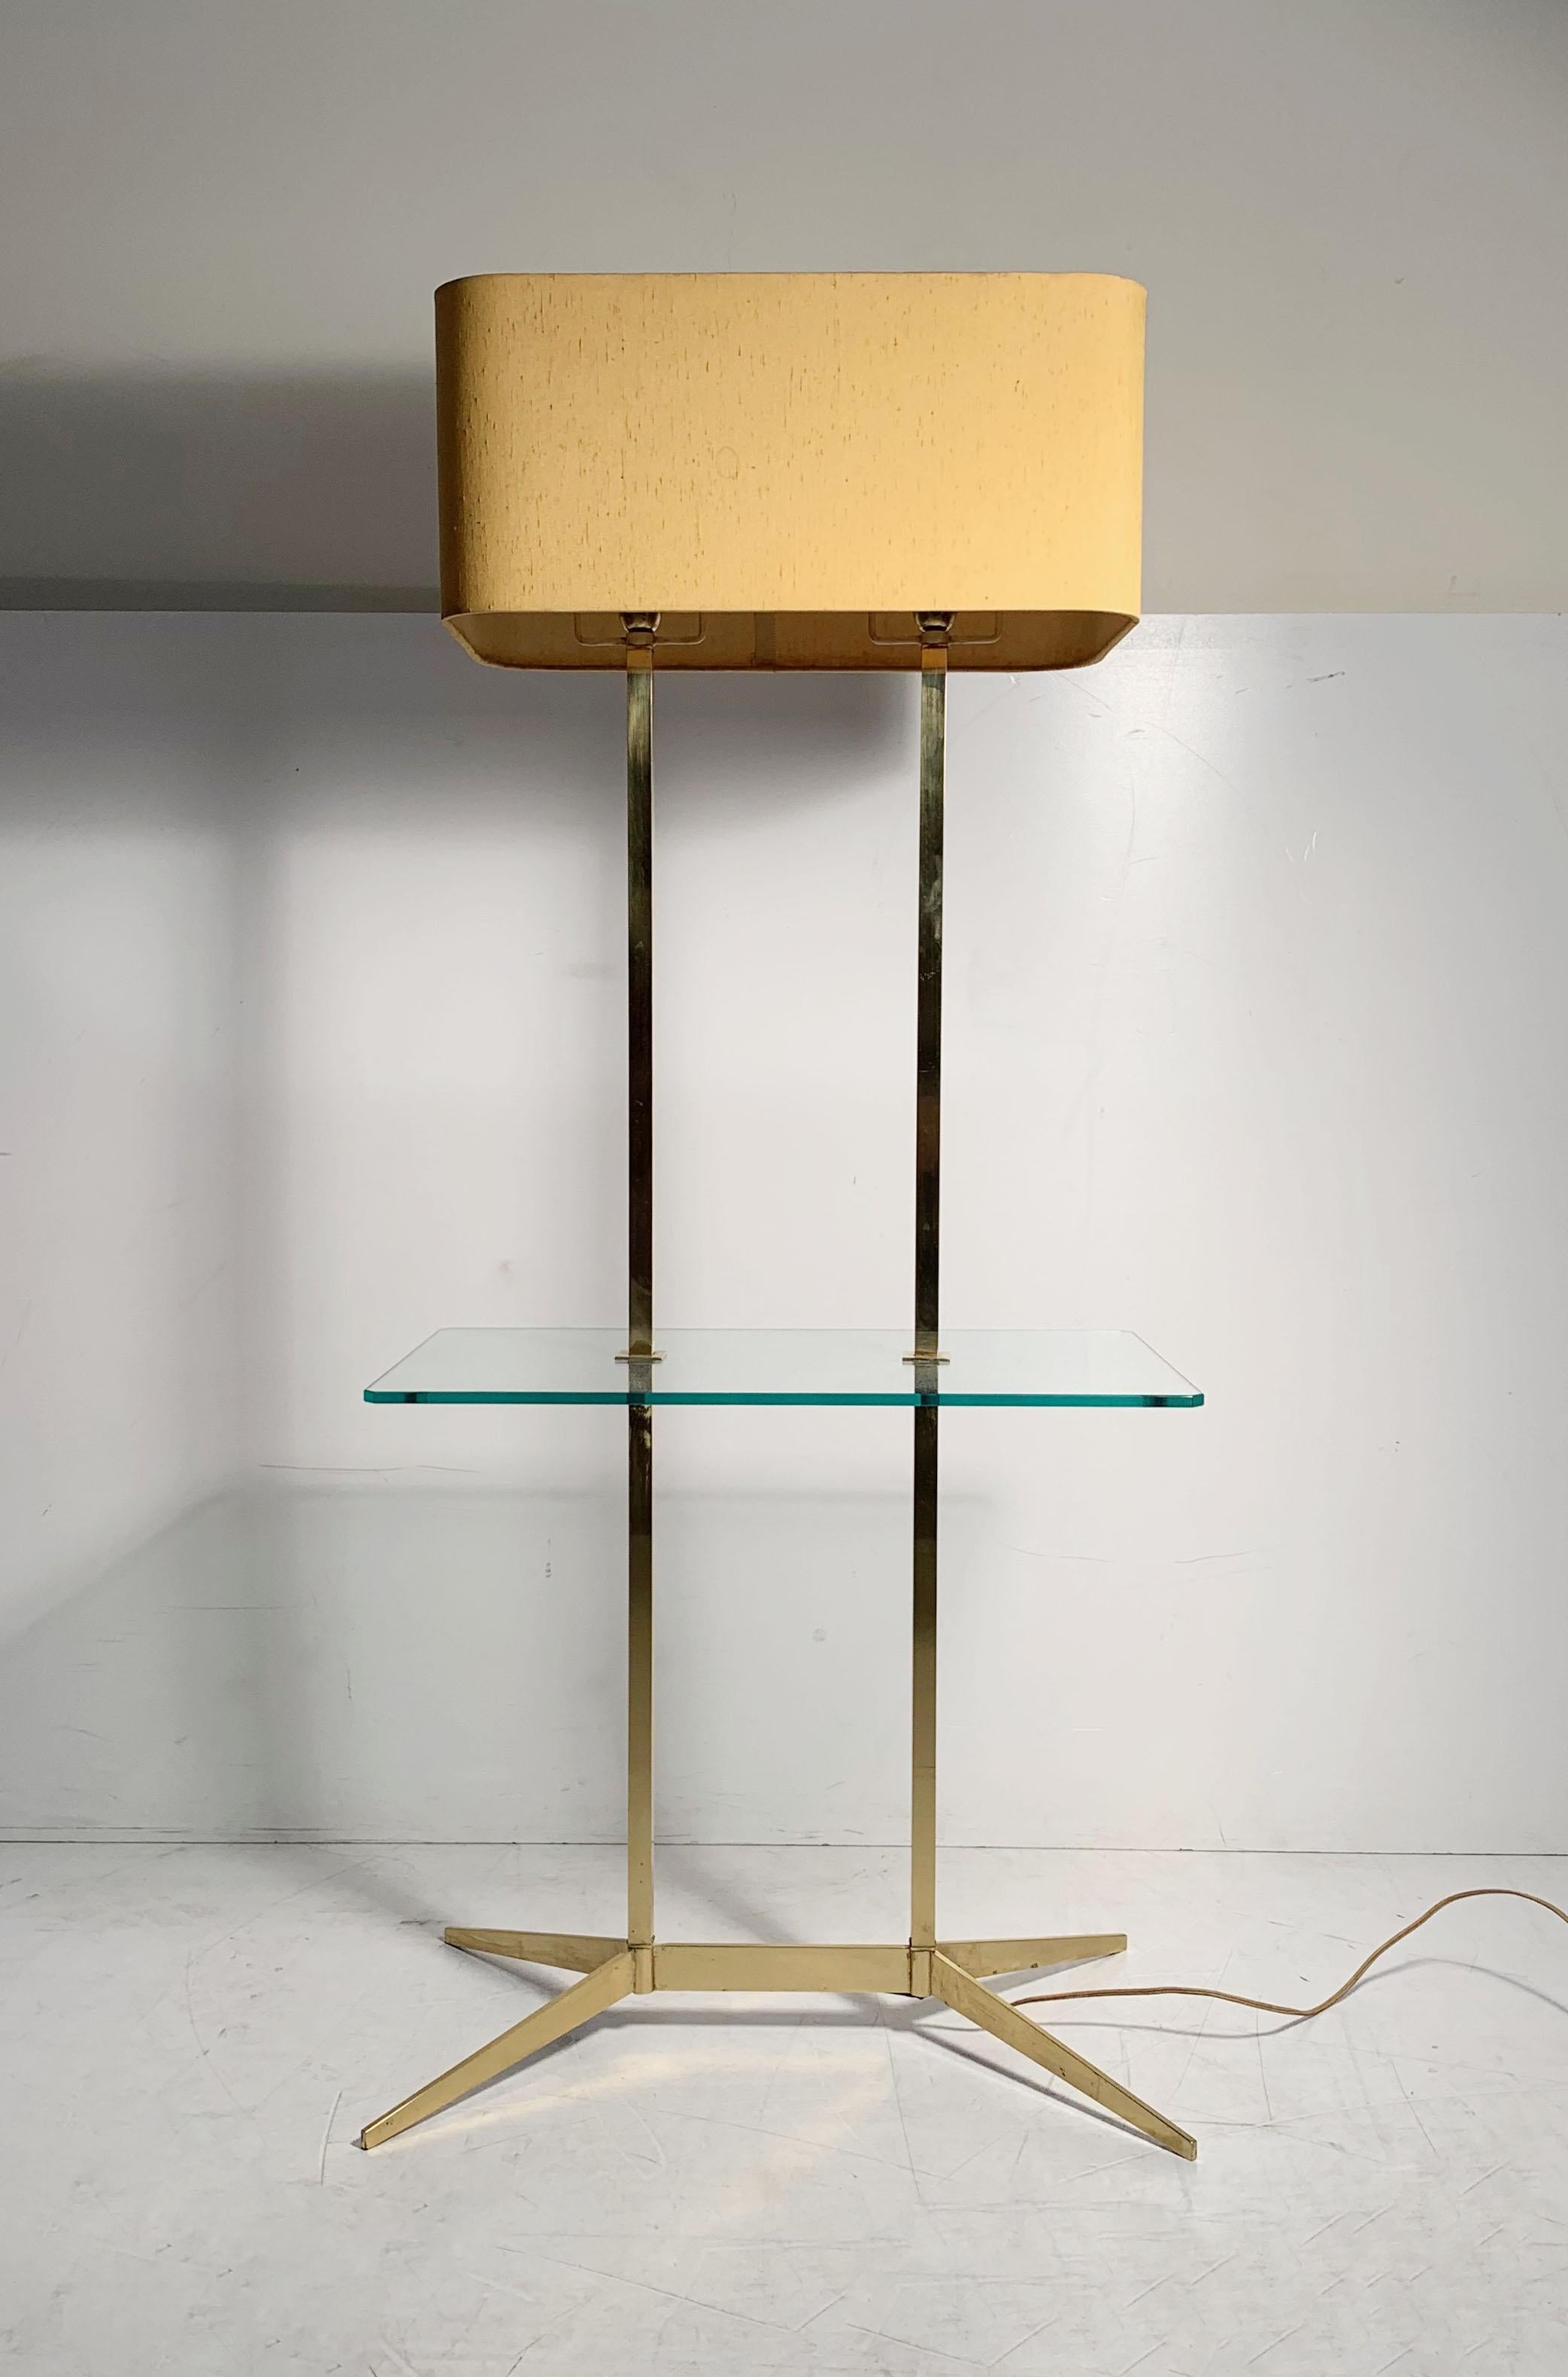 Vintage Mid-Century Modern brass table floor lamp. In the manner of Paul McCobb, Gerald Thurston, Arredoluce and Fontana Arte. I believe the lamp is manufactured by Stiffel. Glass table top was specially cut to match the wood top that had originally